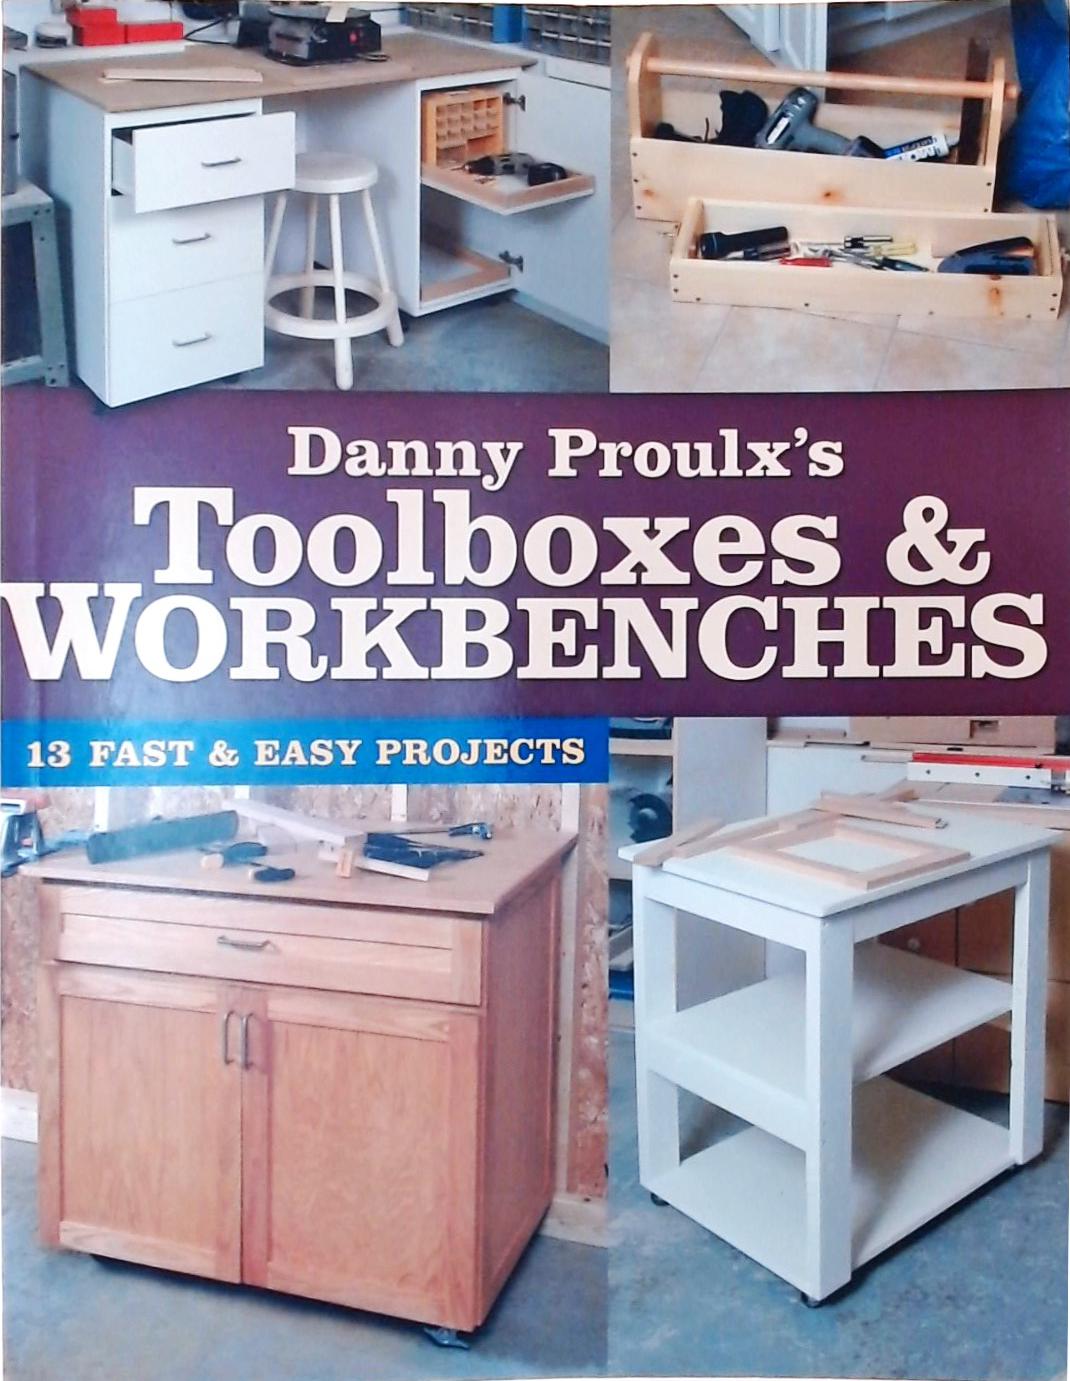 Danny Proulx's Toolboxes And Workbenches